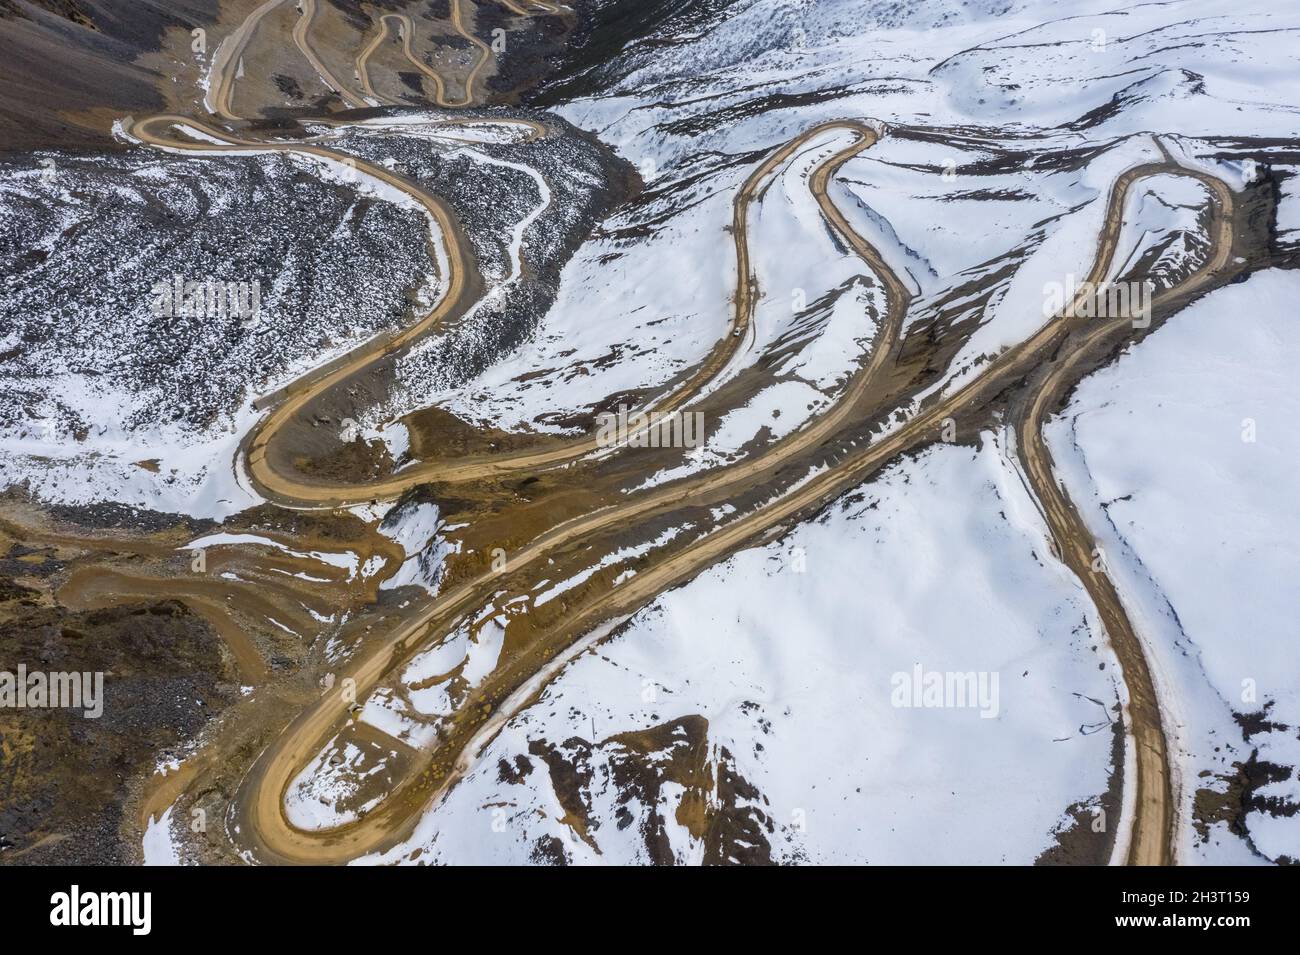 Aerial view of the winding dirt road on snow mountain Stock Photo